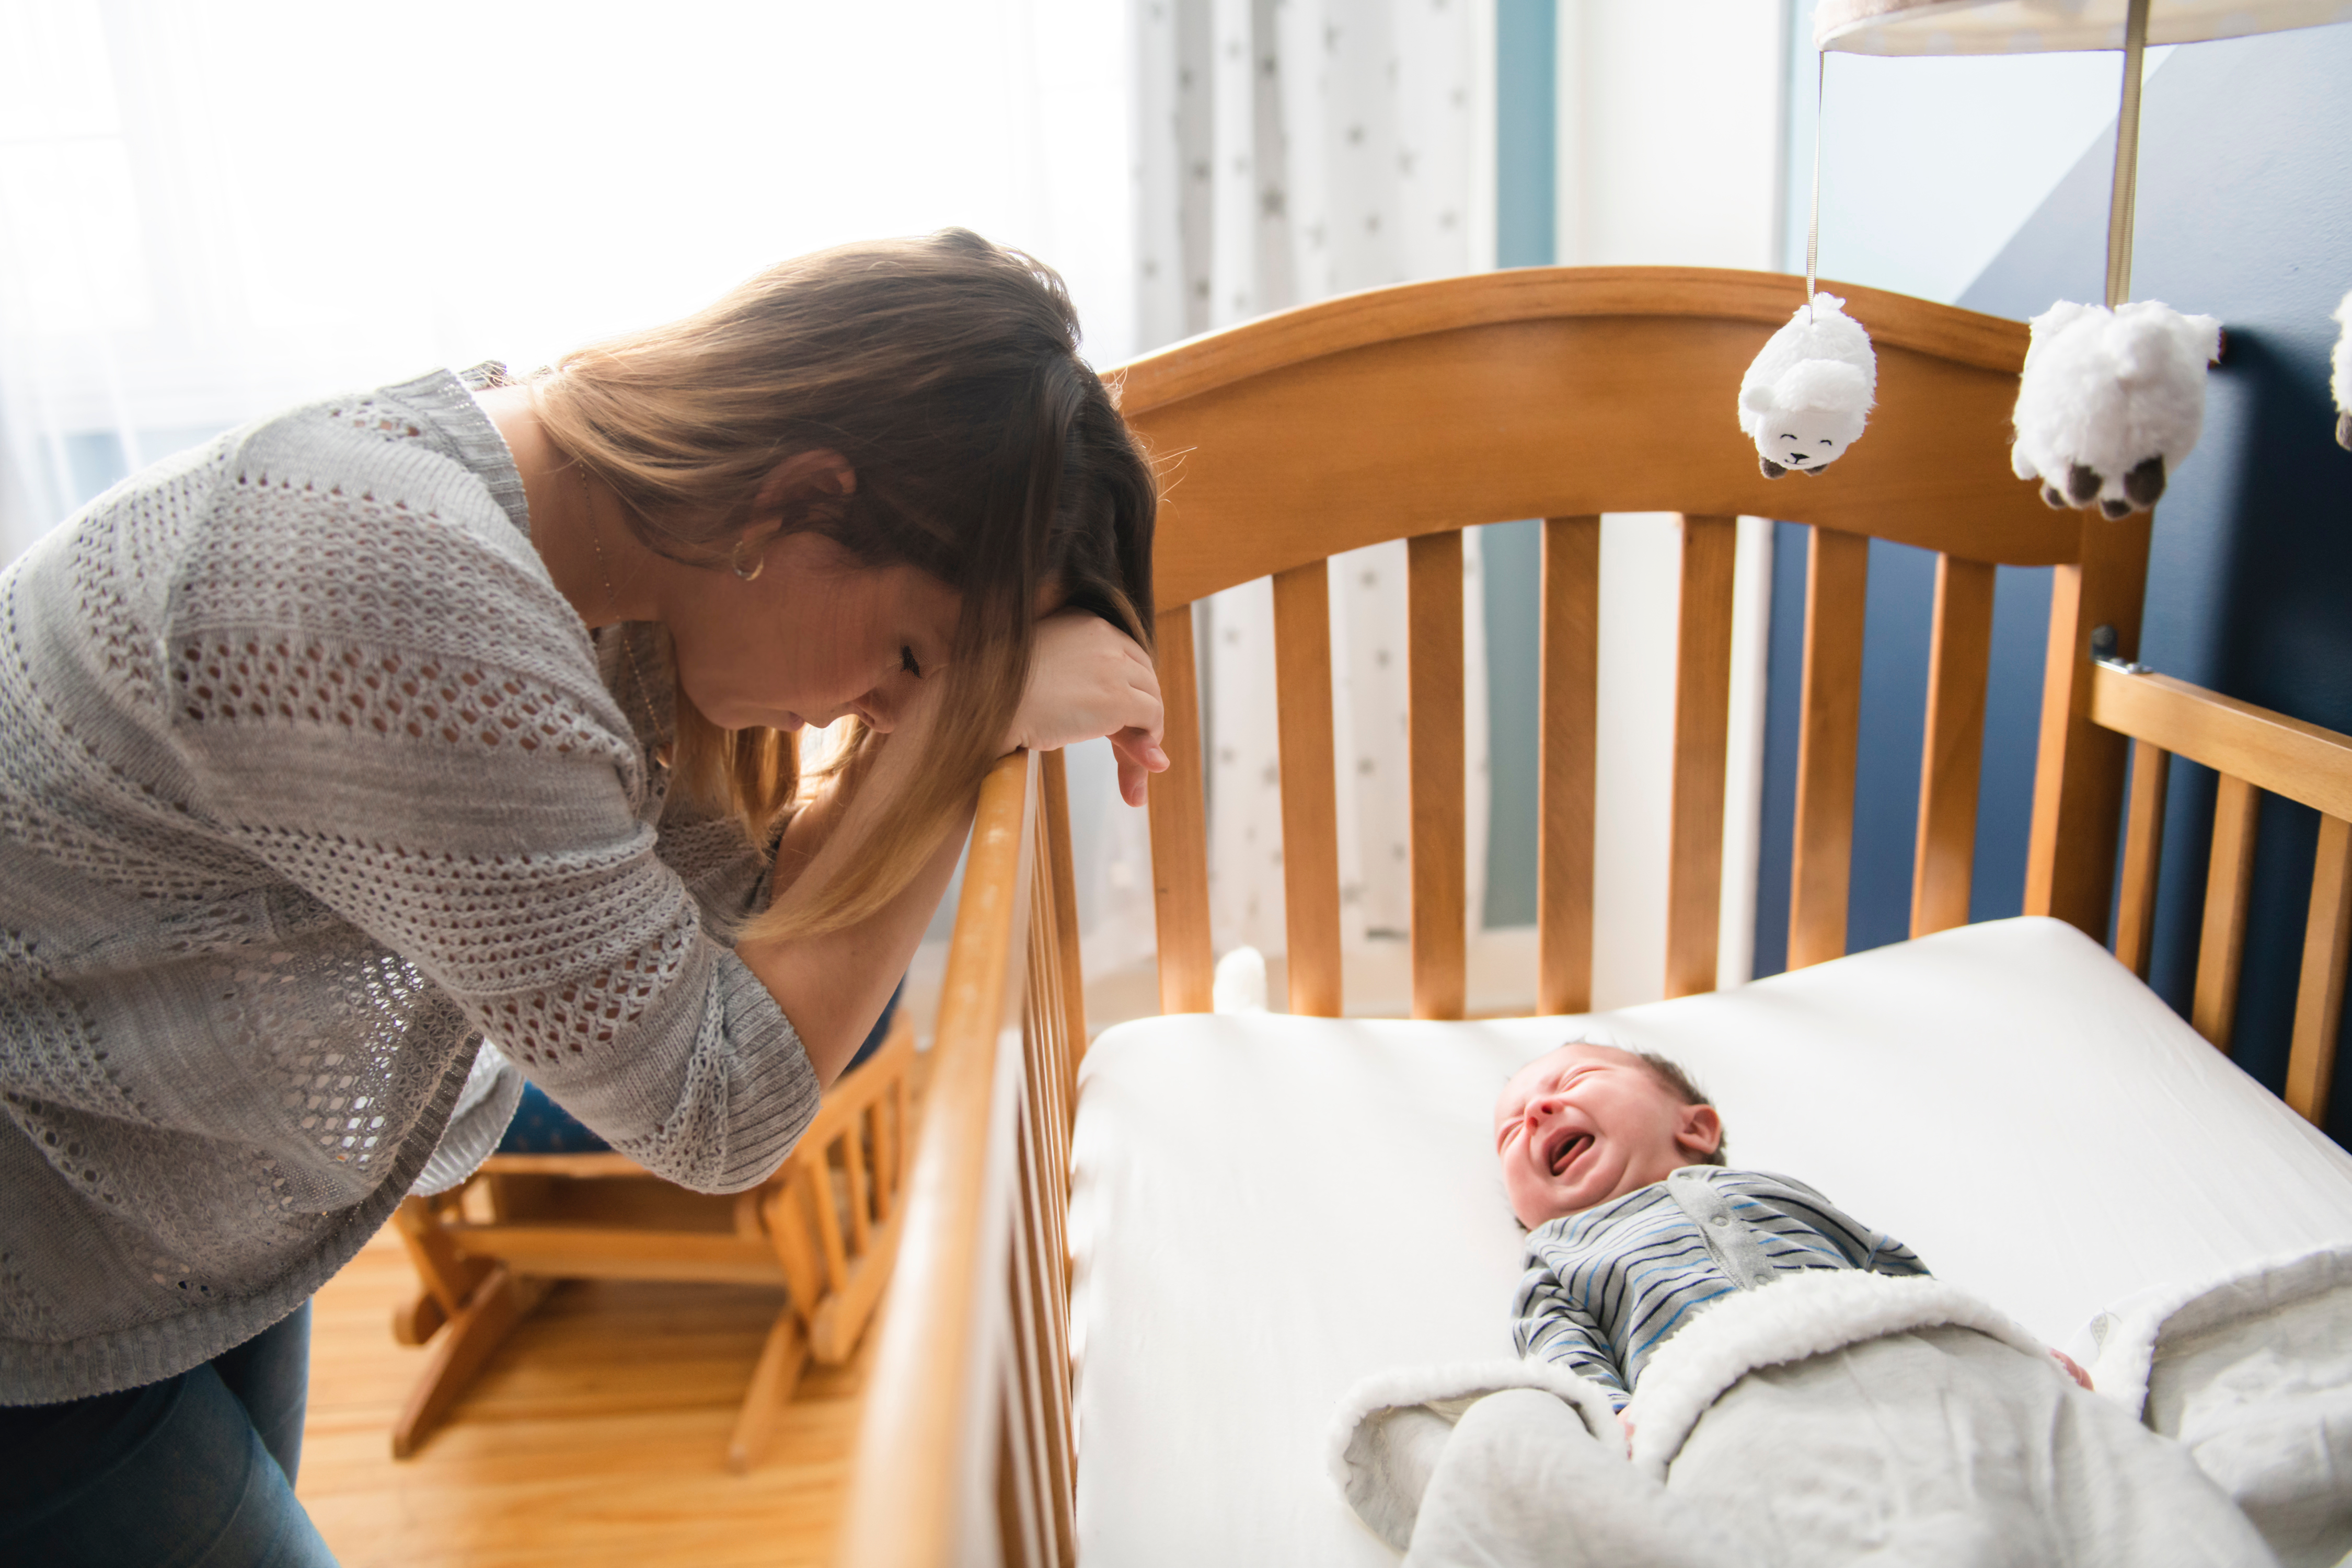 A tired mother with a crying baby | Source: Shutterstock